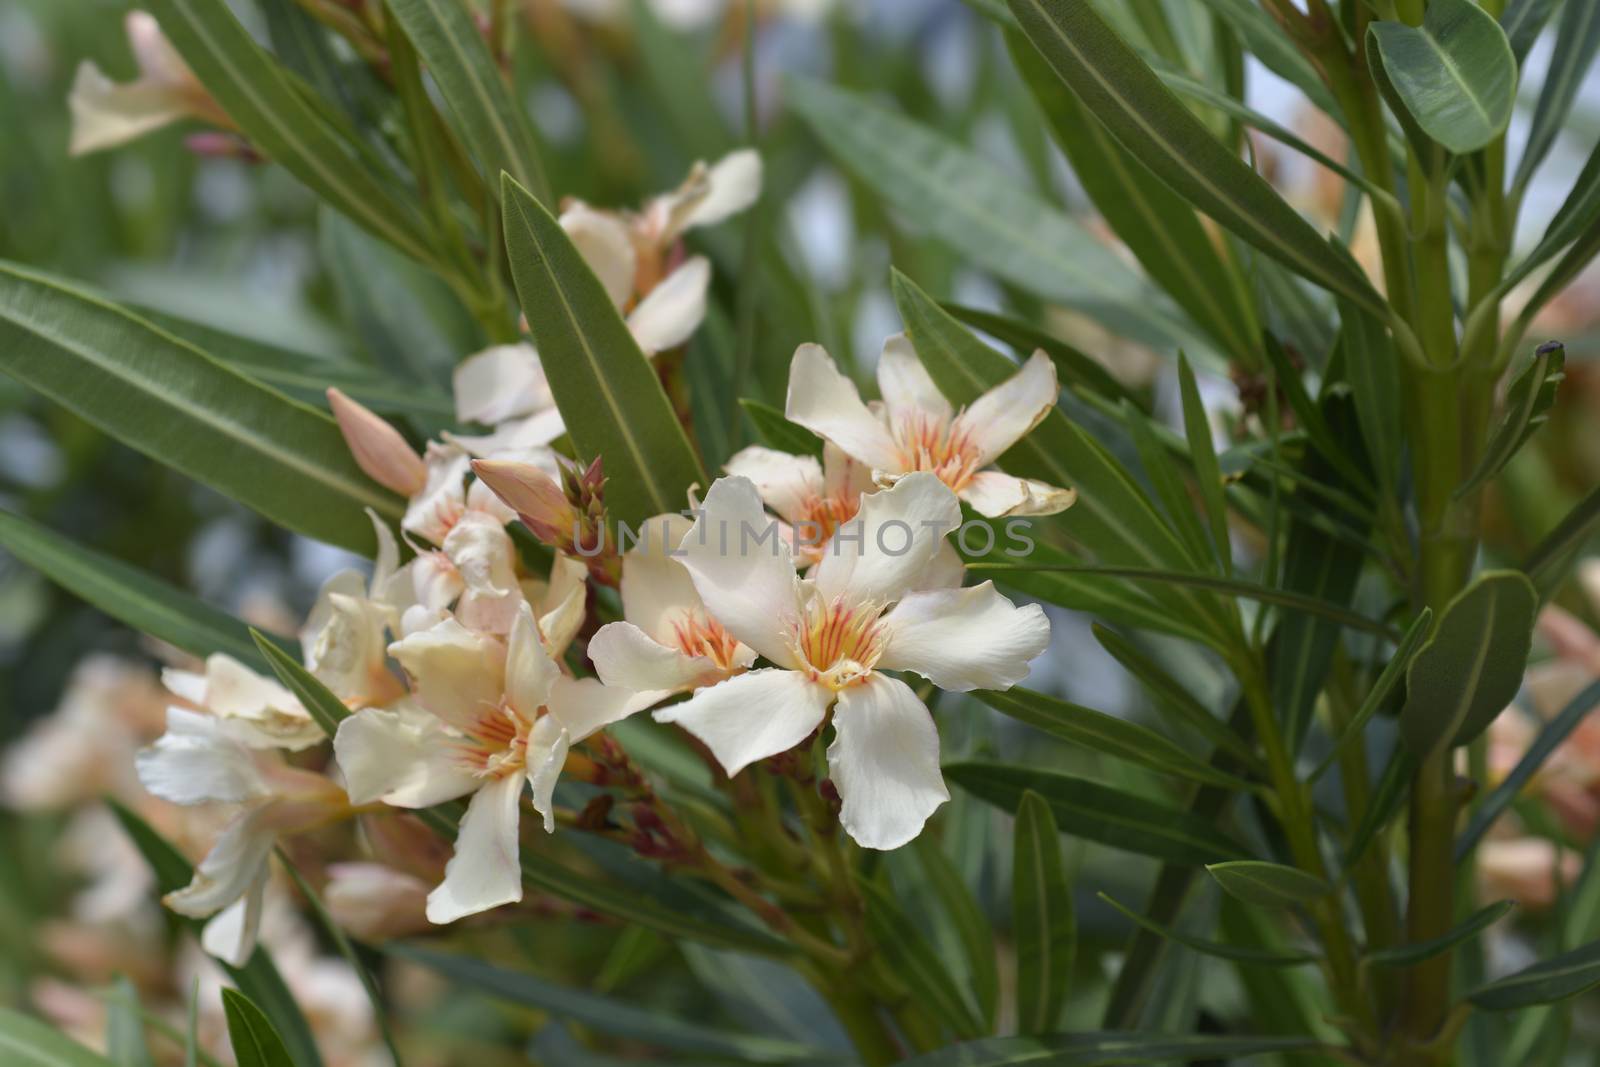 Common oleander pale peach colored flowers - Latin name - Nerium oleander